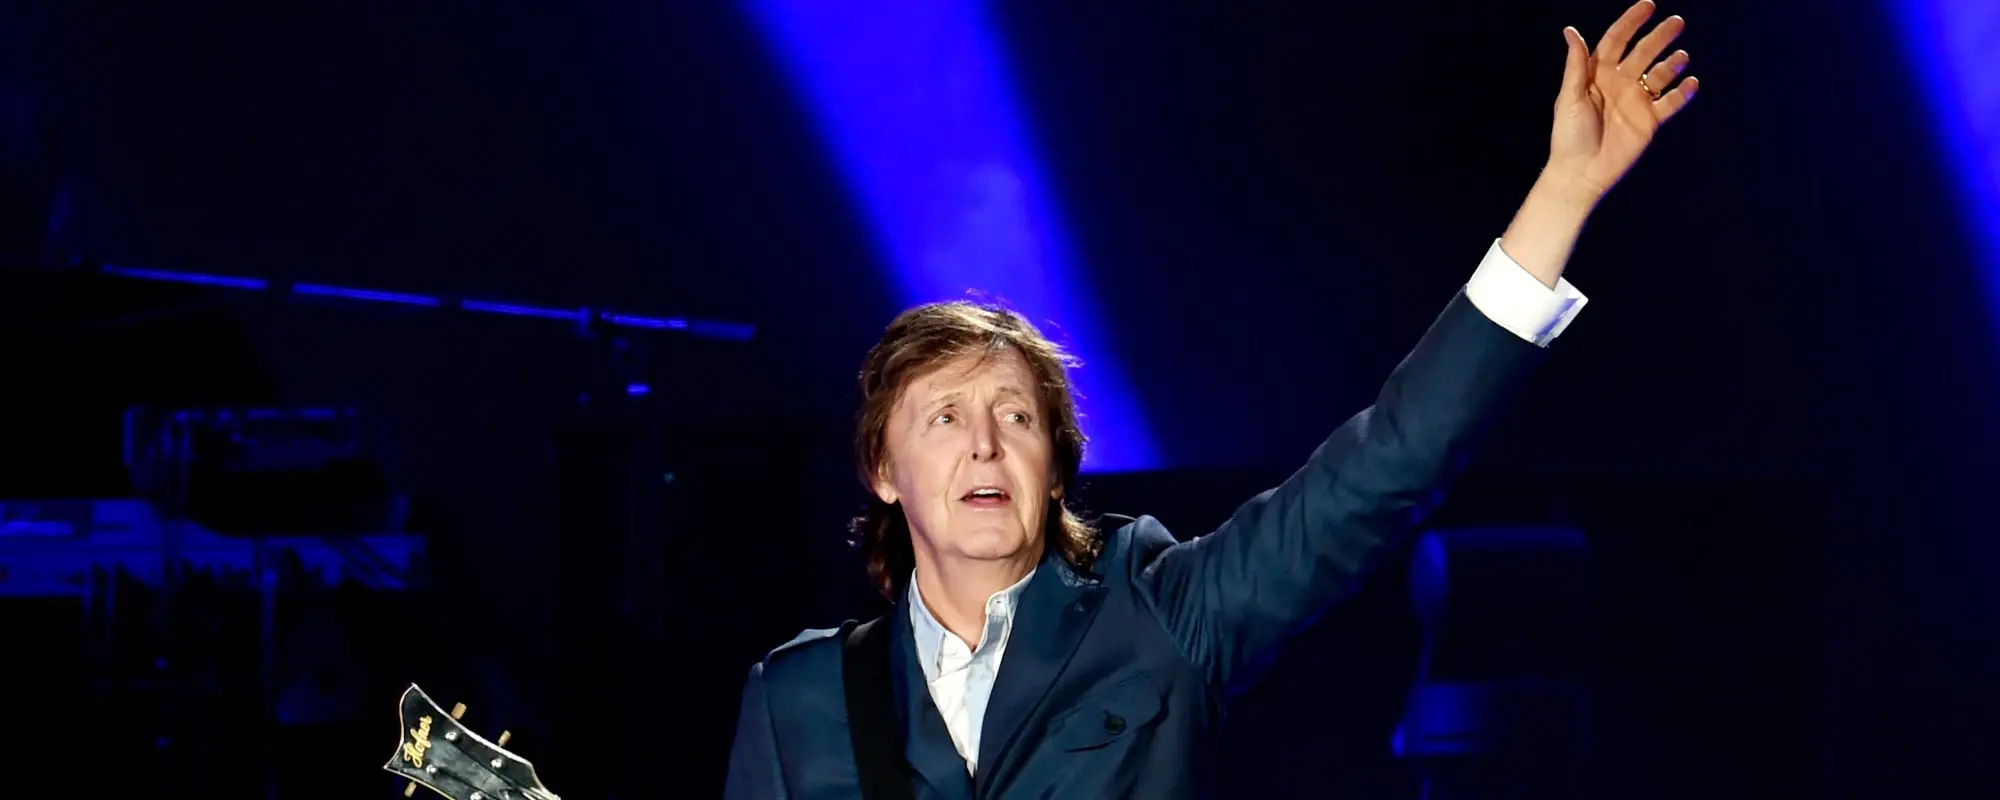 Watch Paul McCartney Team Up with the Eagles to Perform “Let It Be” During Jimmy Buffett Tribute Concert